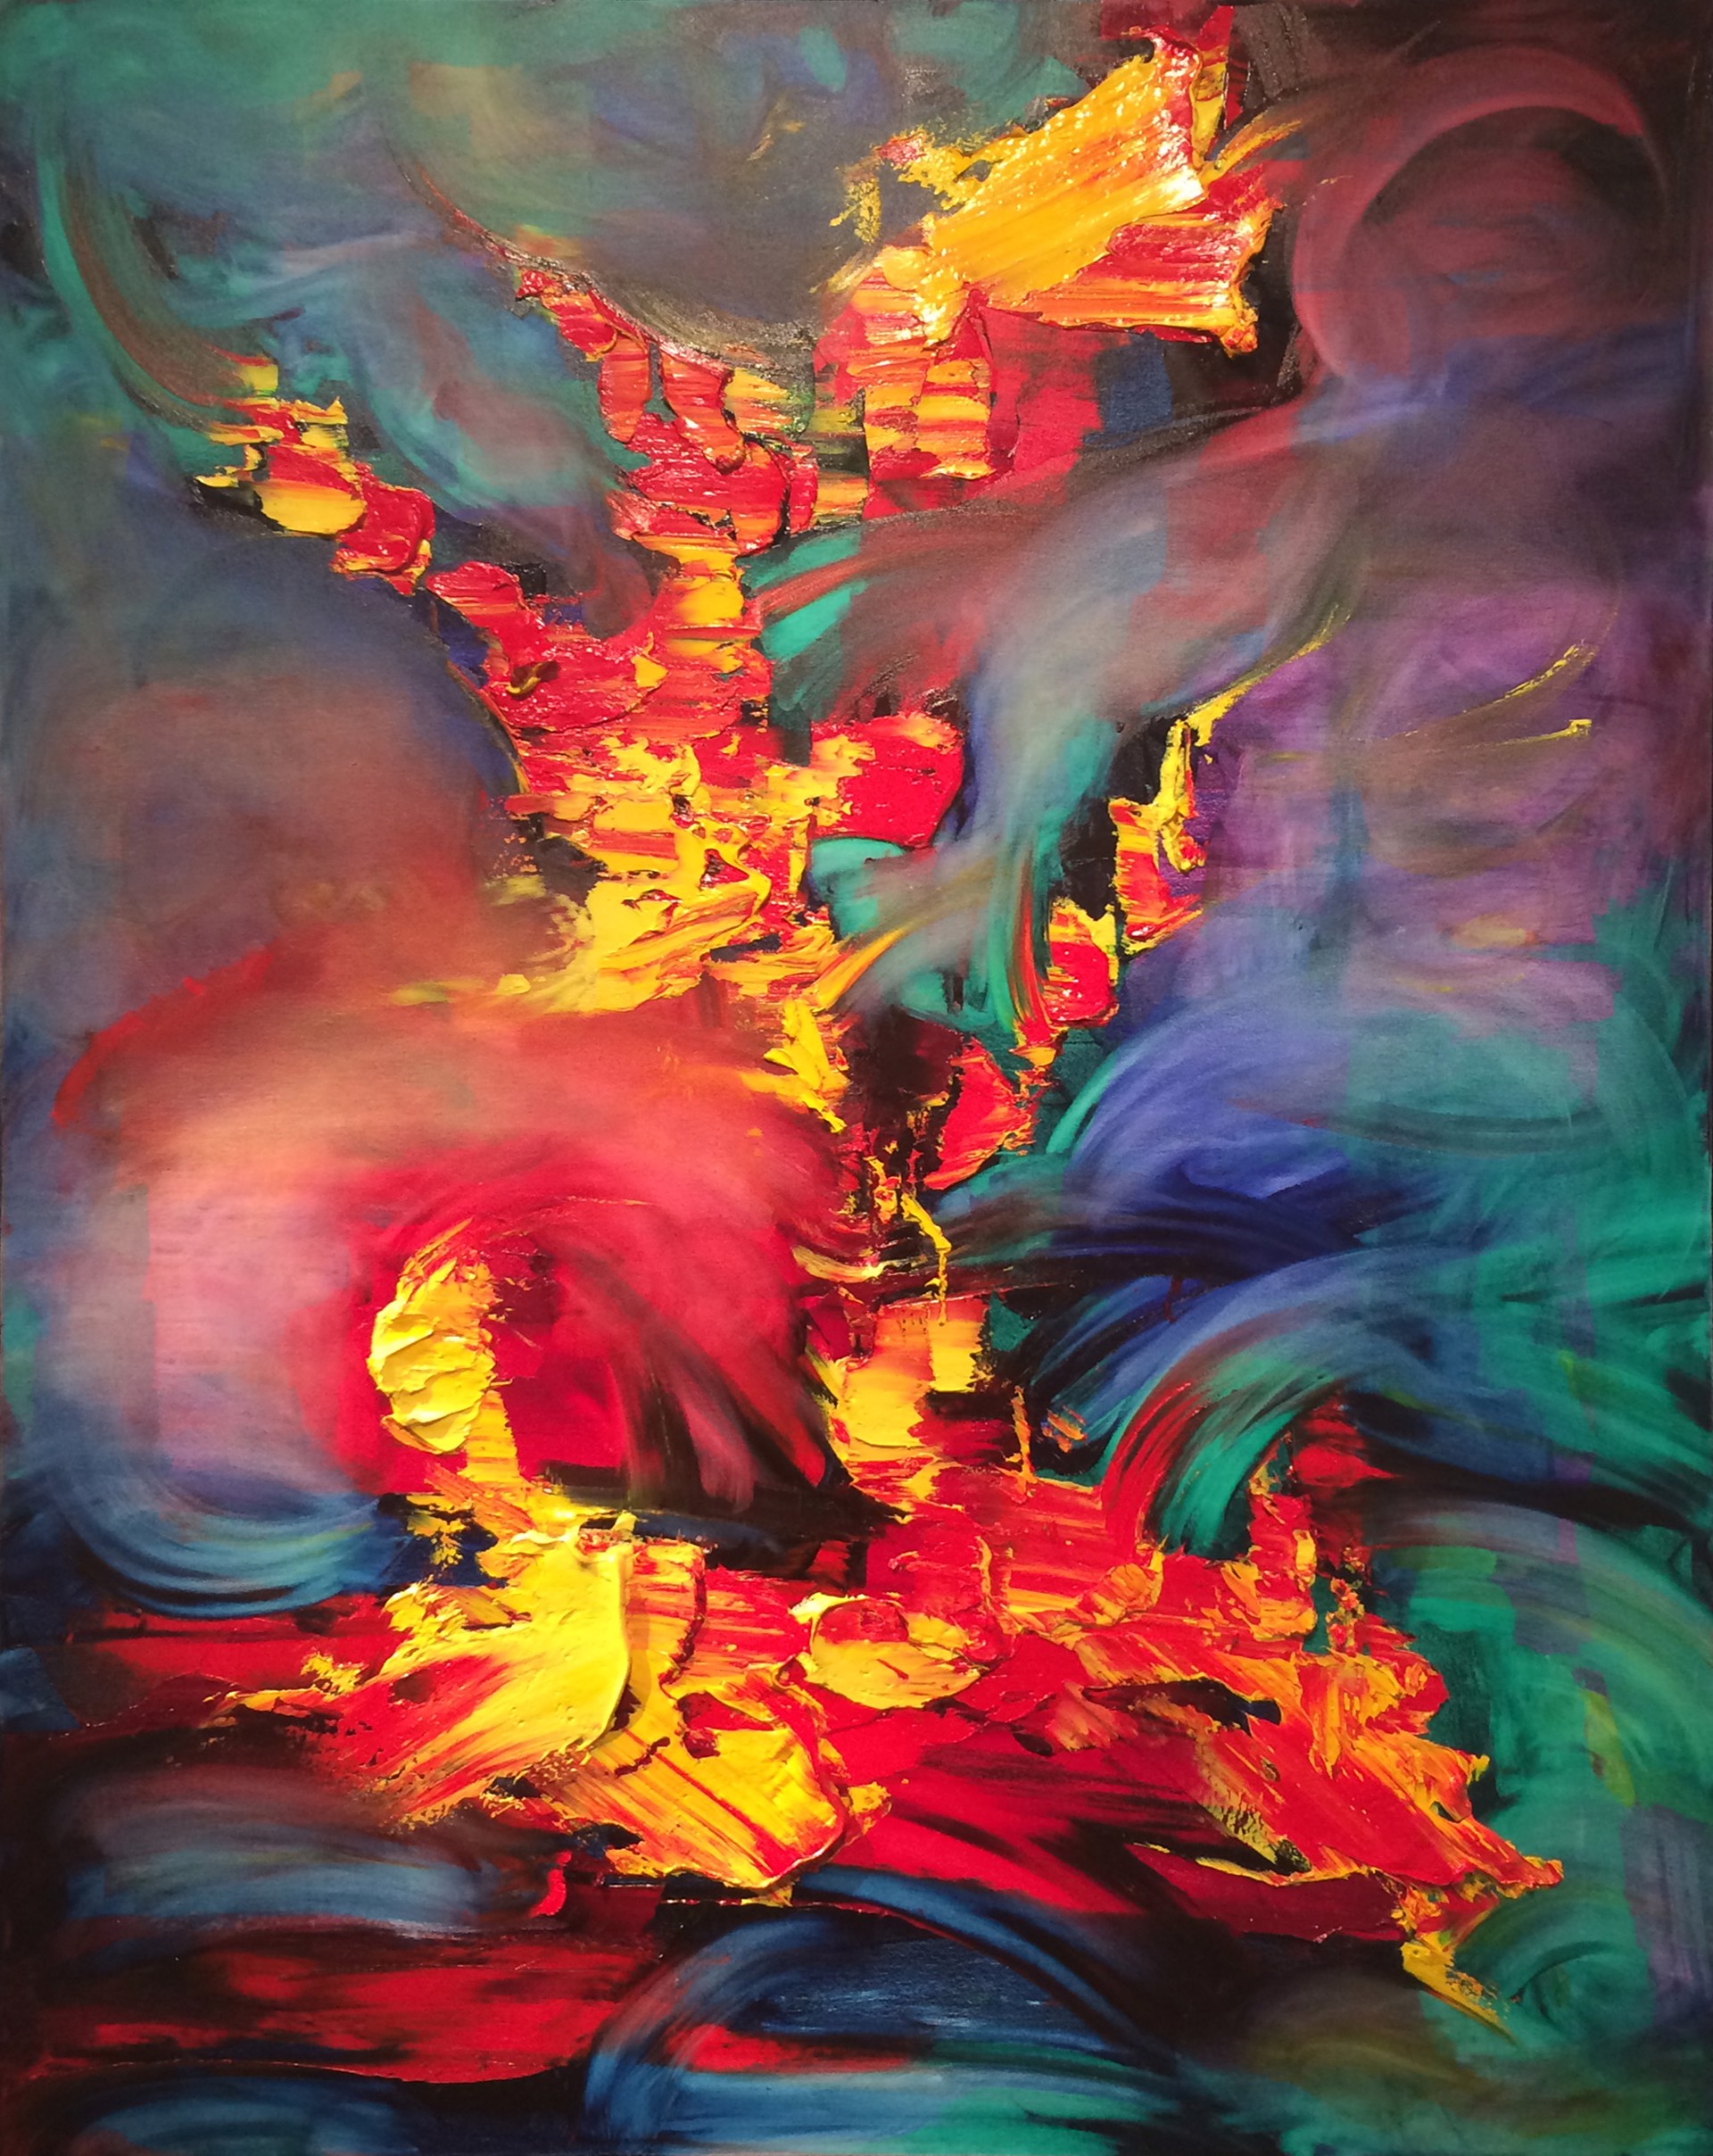 Spontaneous Combustion by Lea Fisher